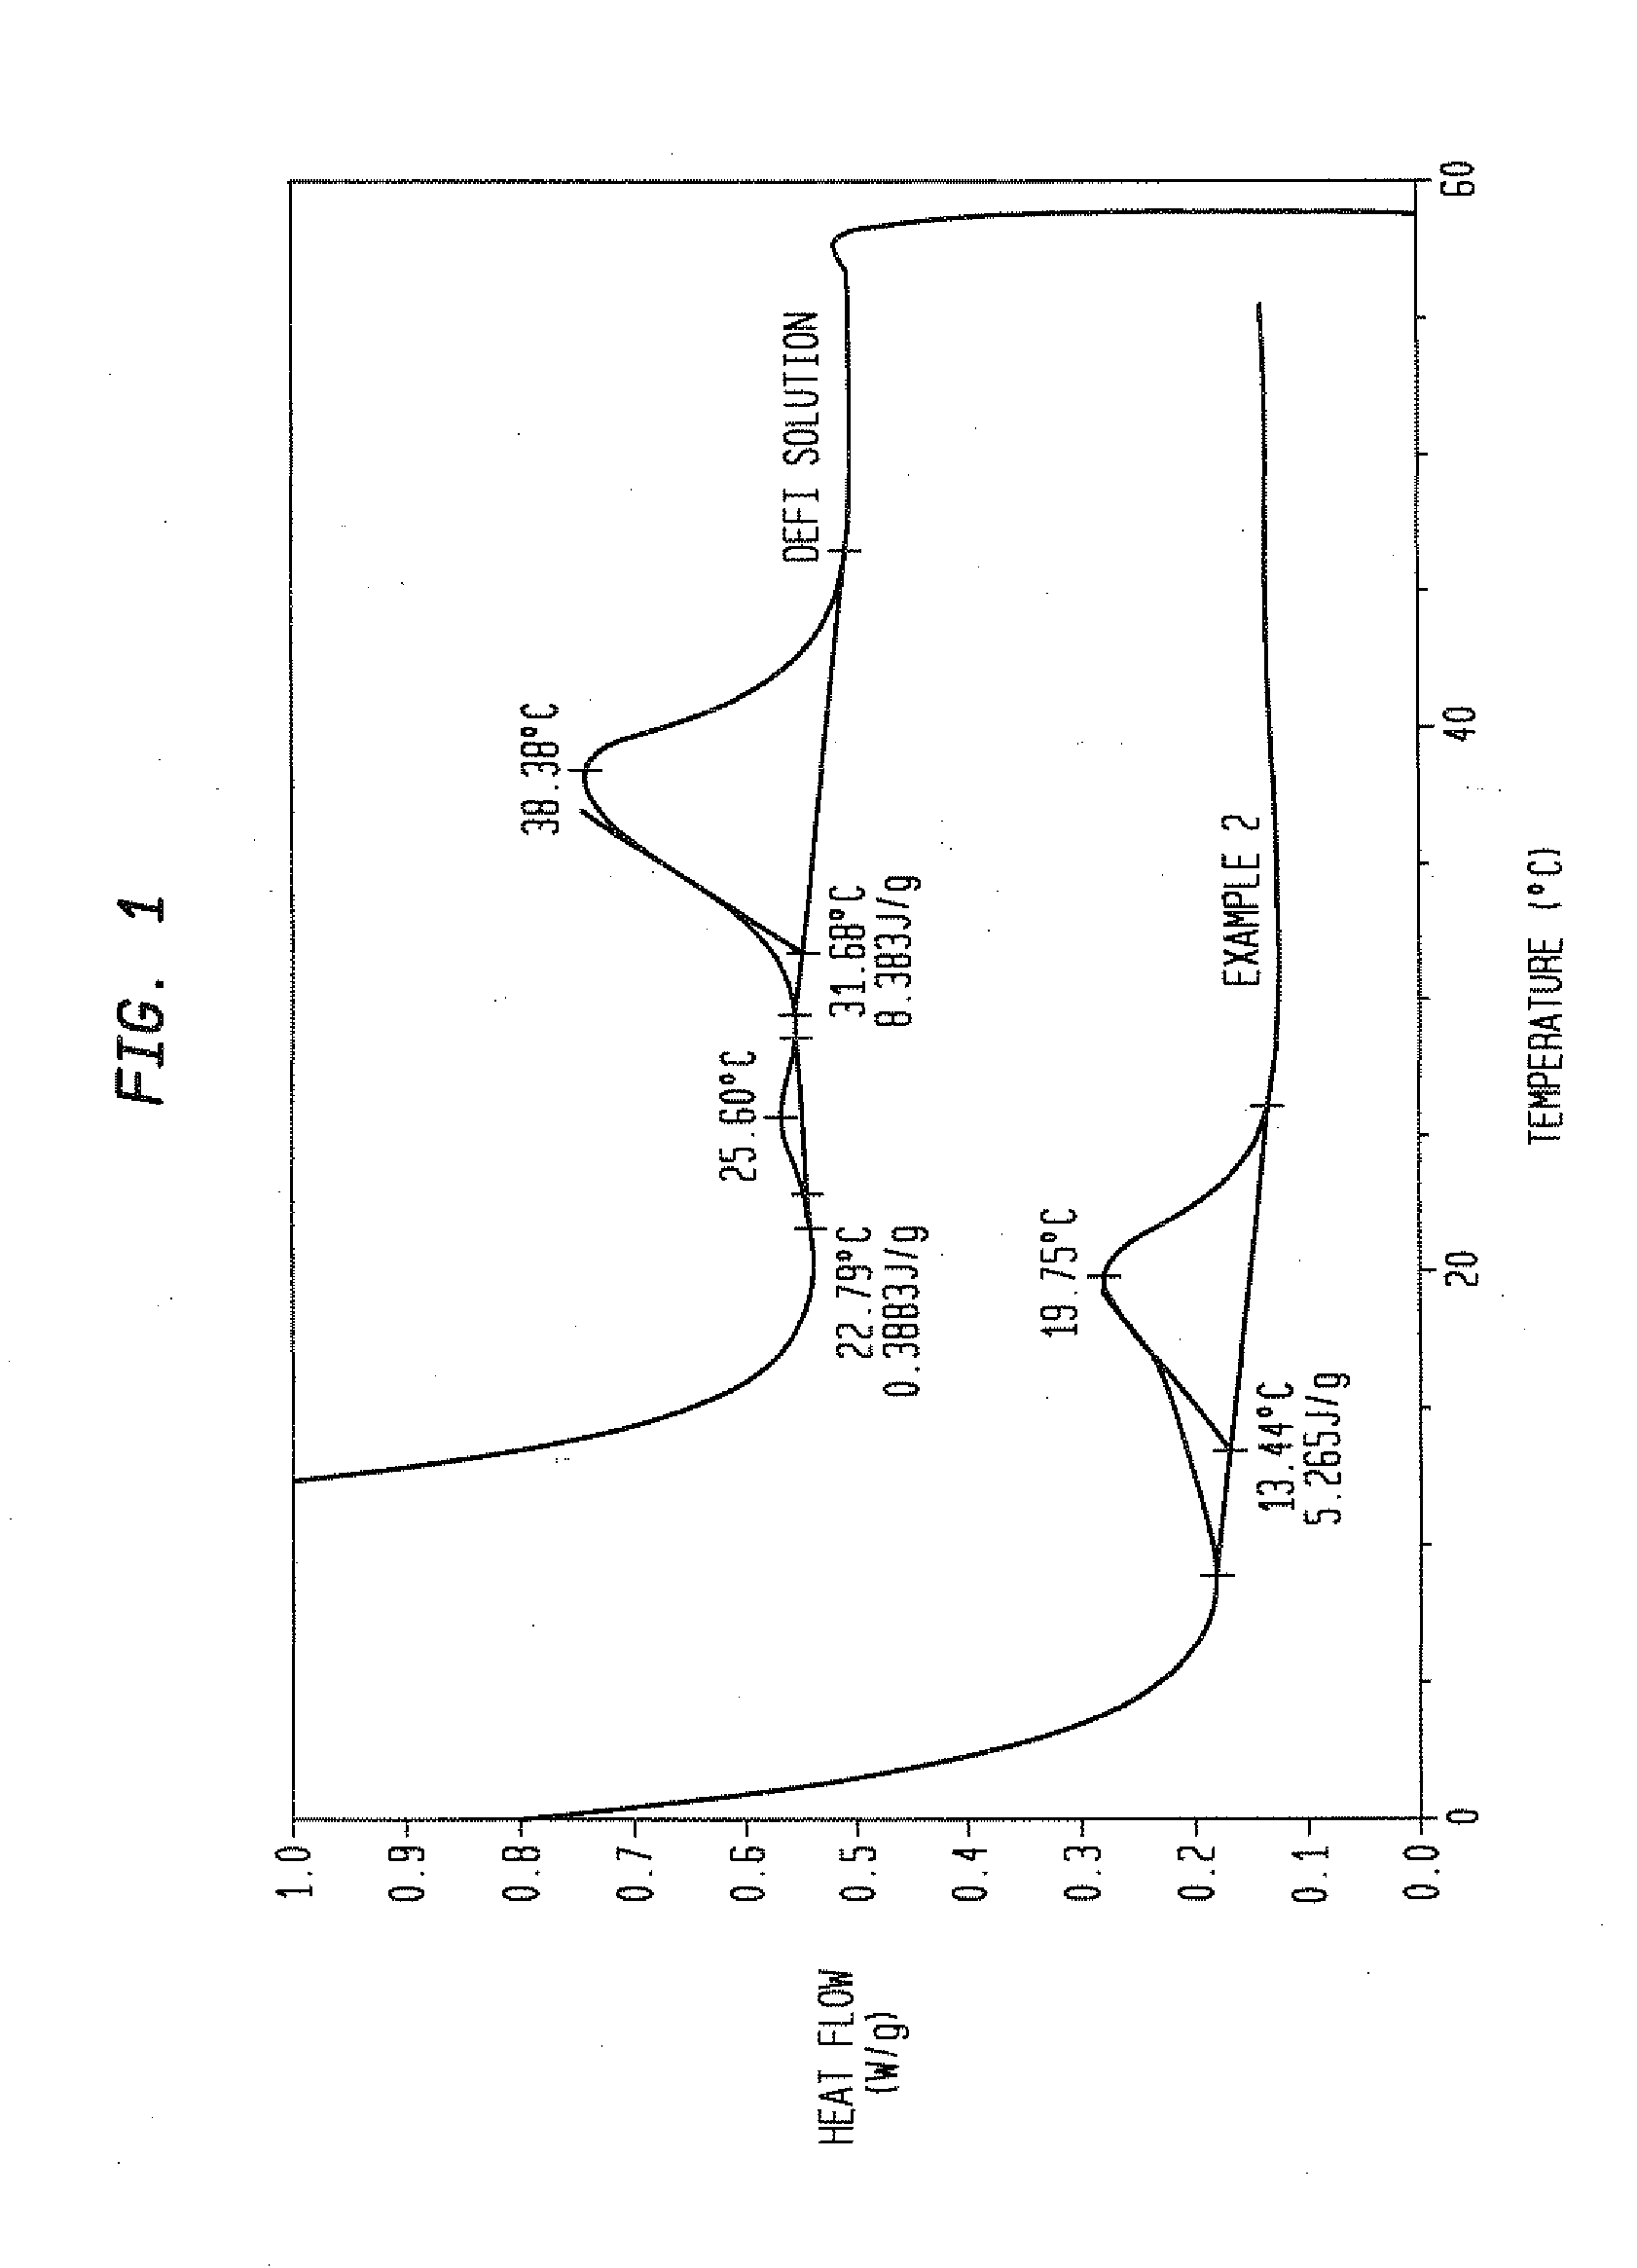 Stable liquid cleansing compositions comprising fatty acyl isethionate surfactant products with high fatty acid content